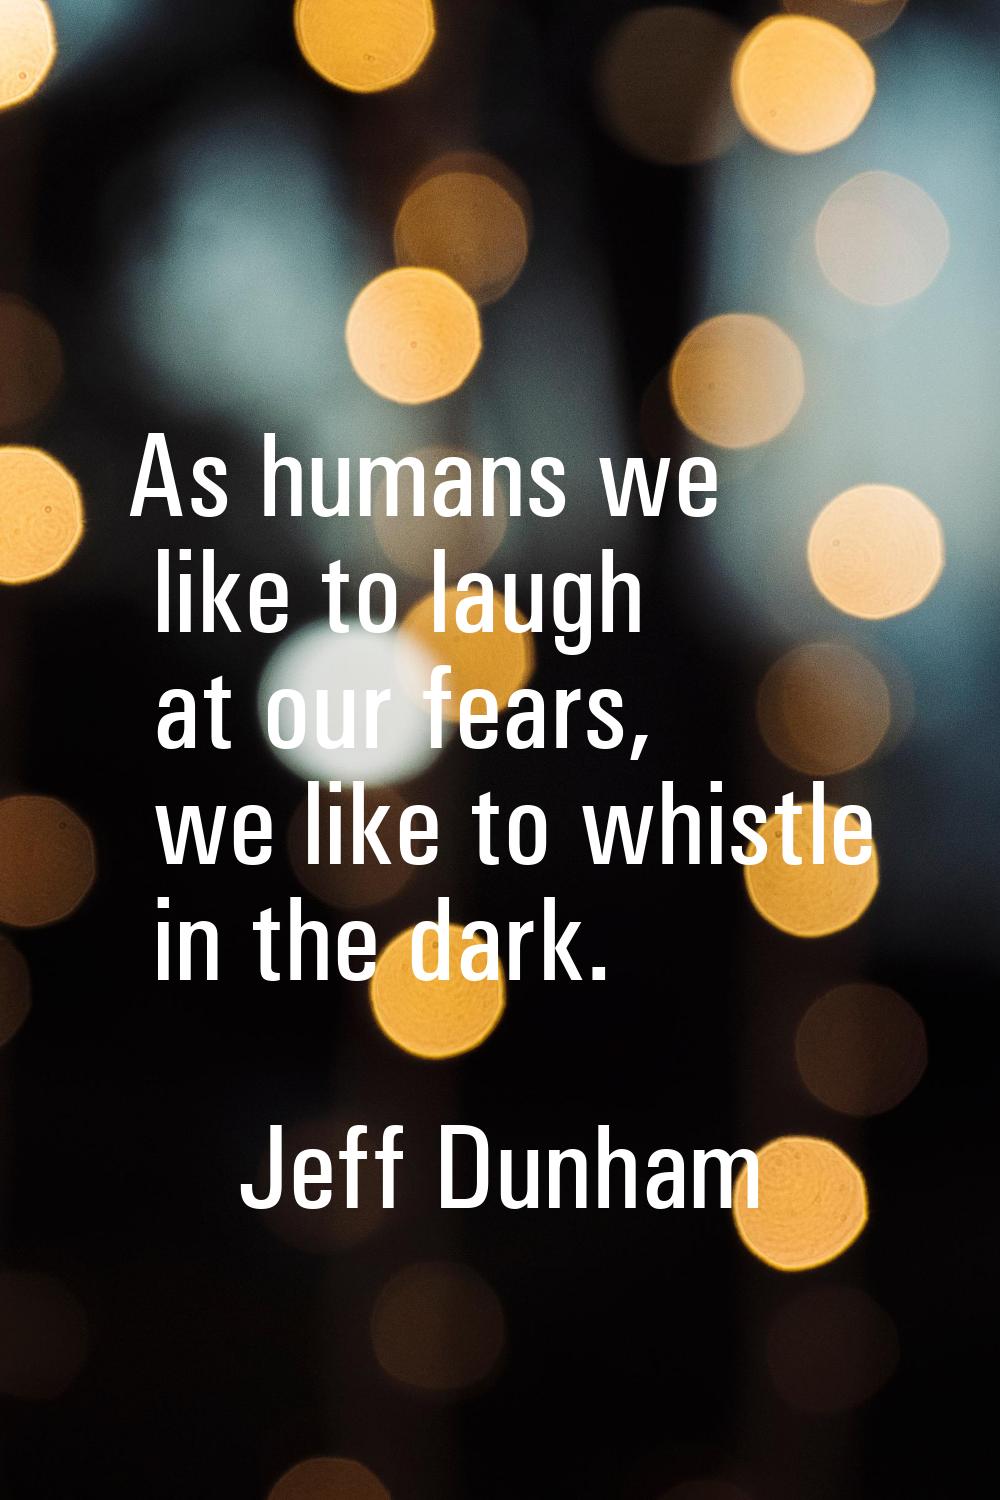 As humans we like to laugh at our fears, we like to whistle in the dark.